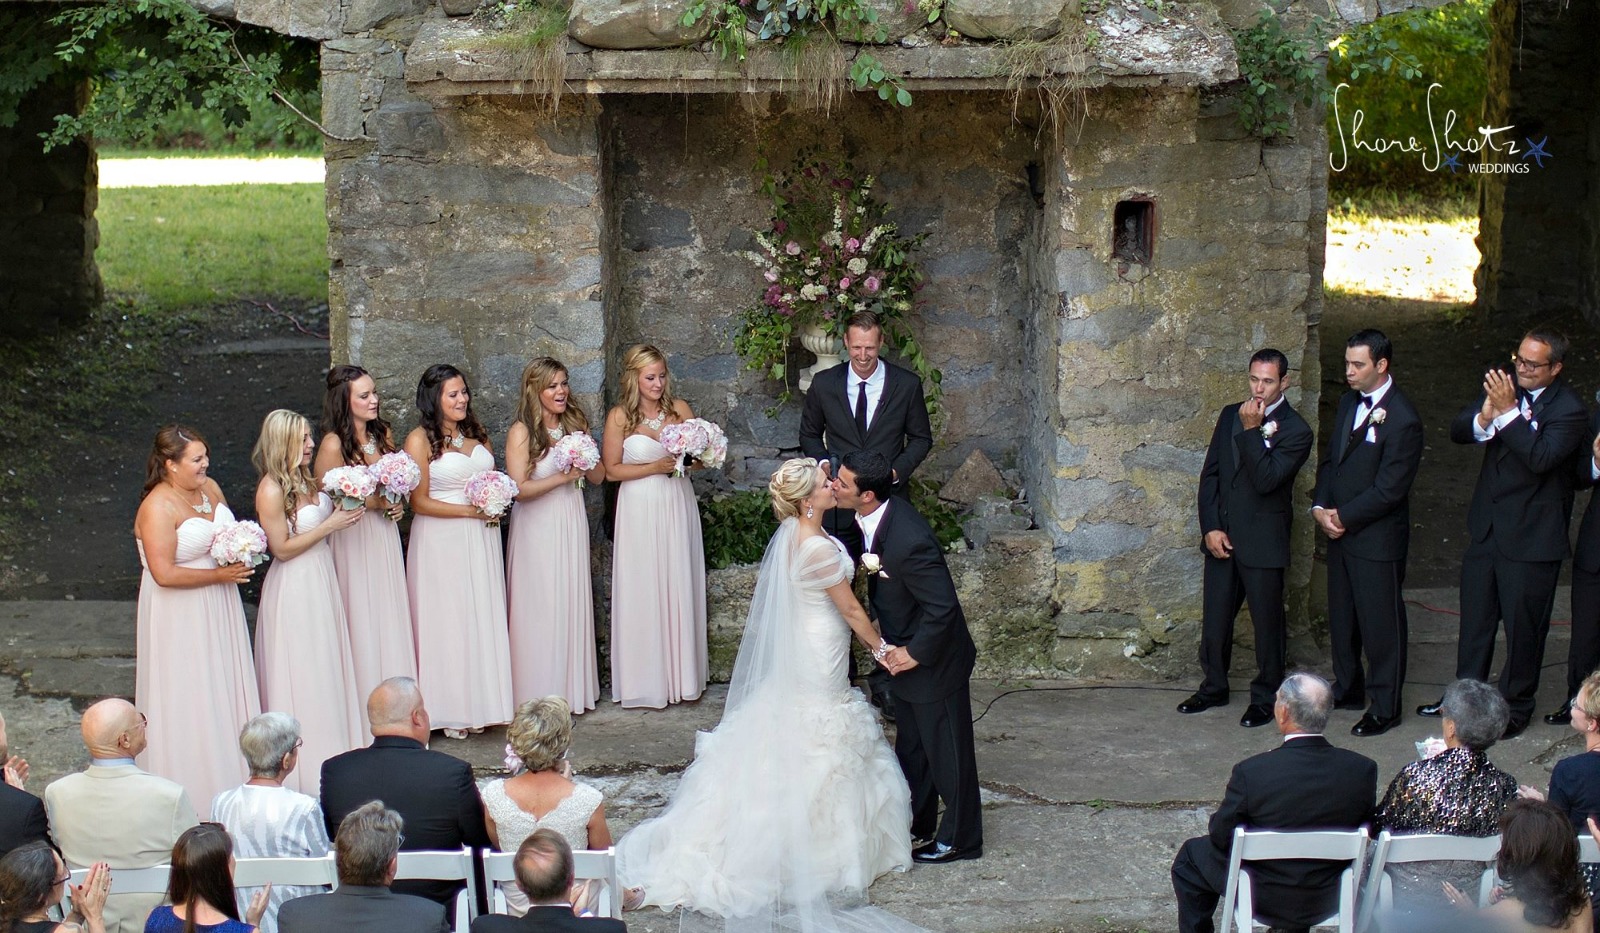 Bride and groom kissing at stone home ruins after wedding ceremony